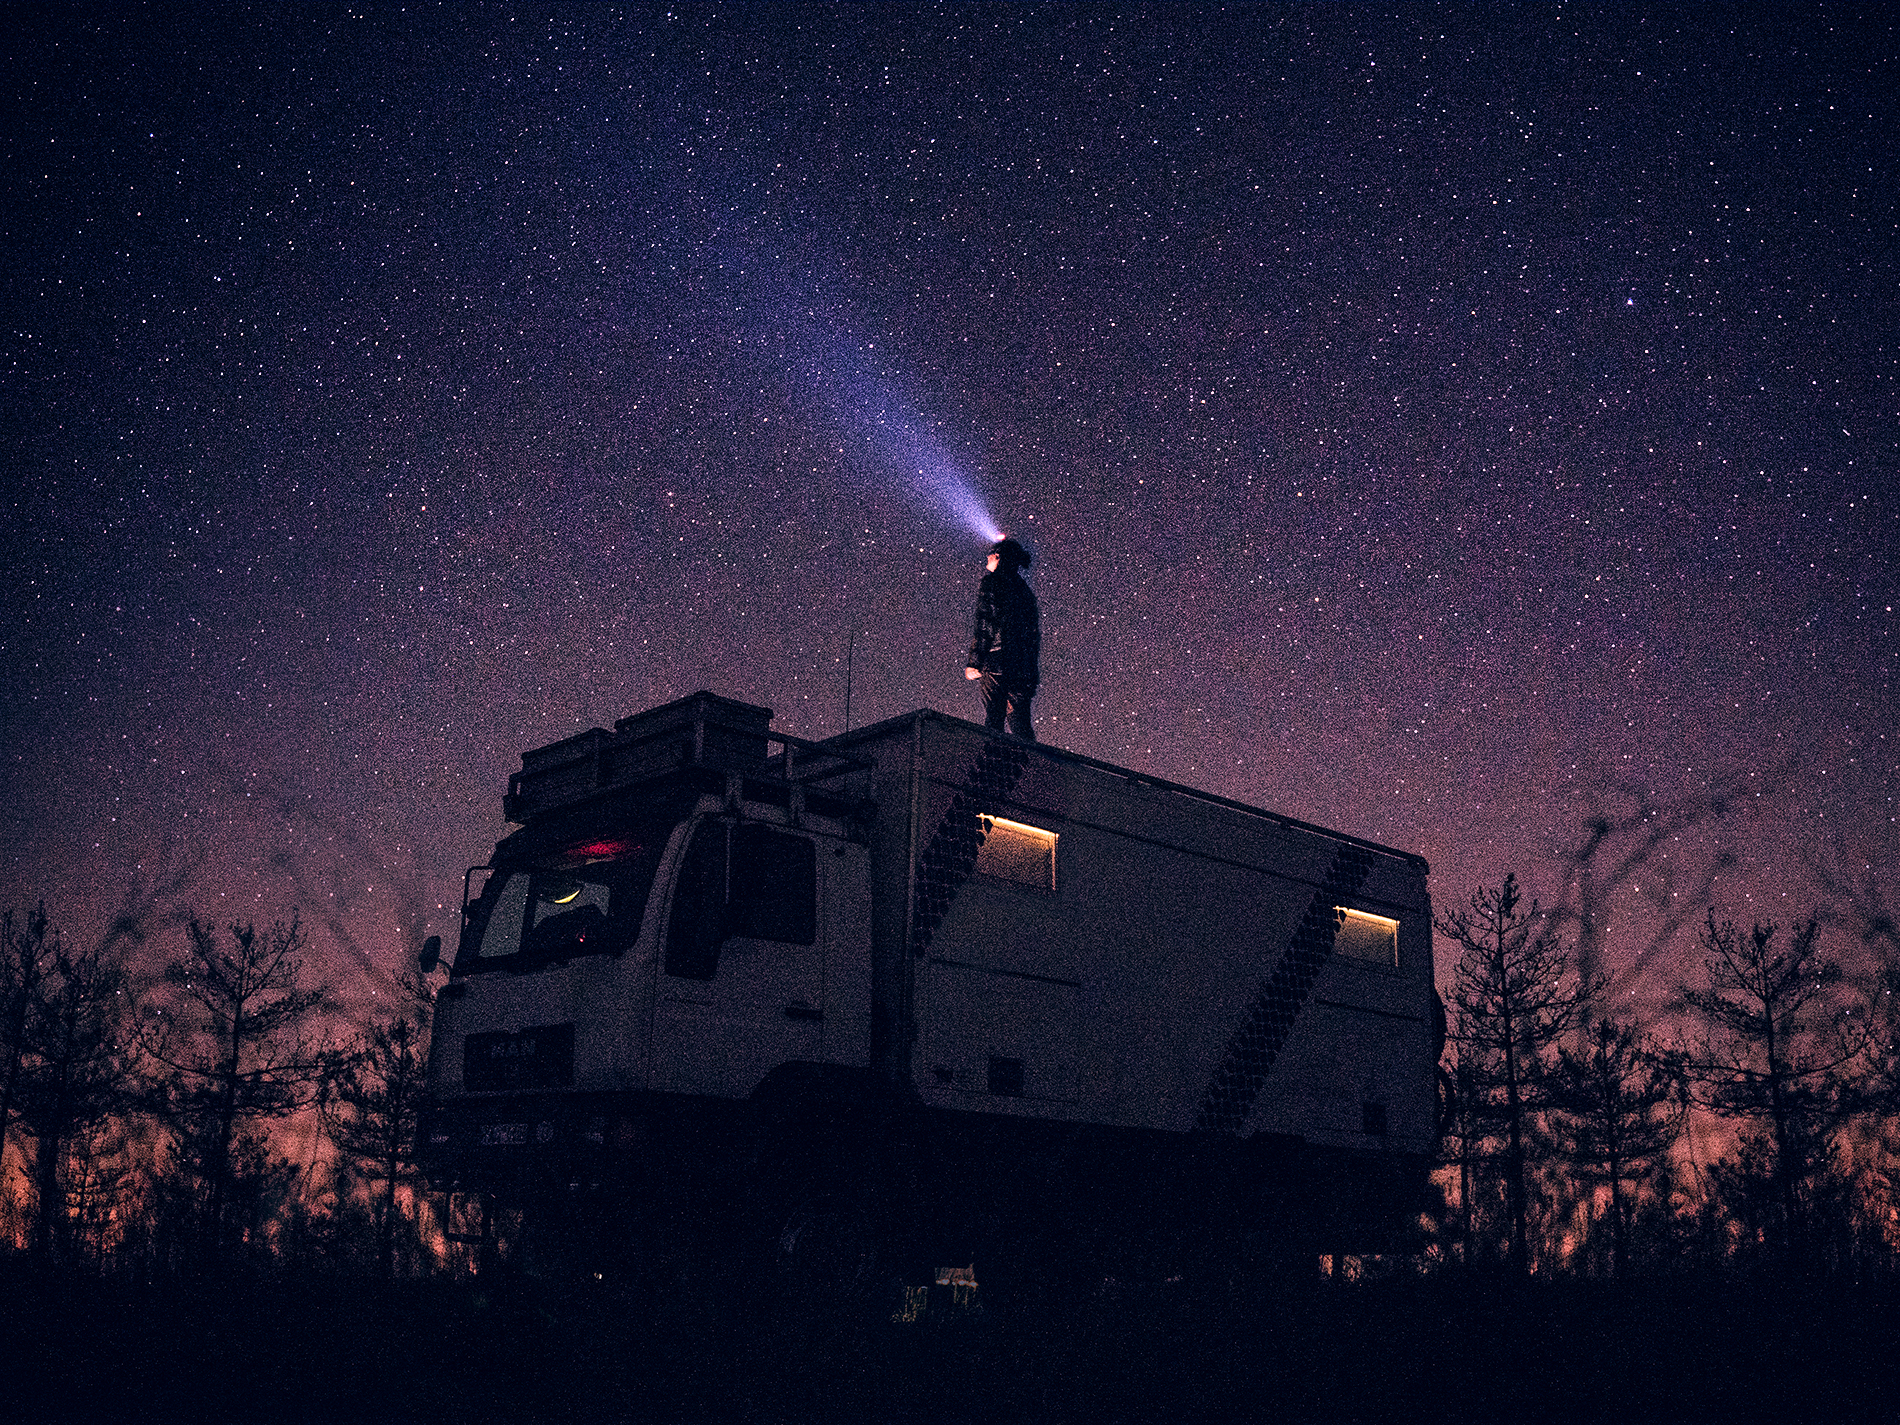 A person standing on an expedition vehicle shining a torch into the sky full of stars.